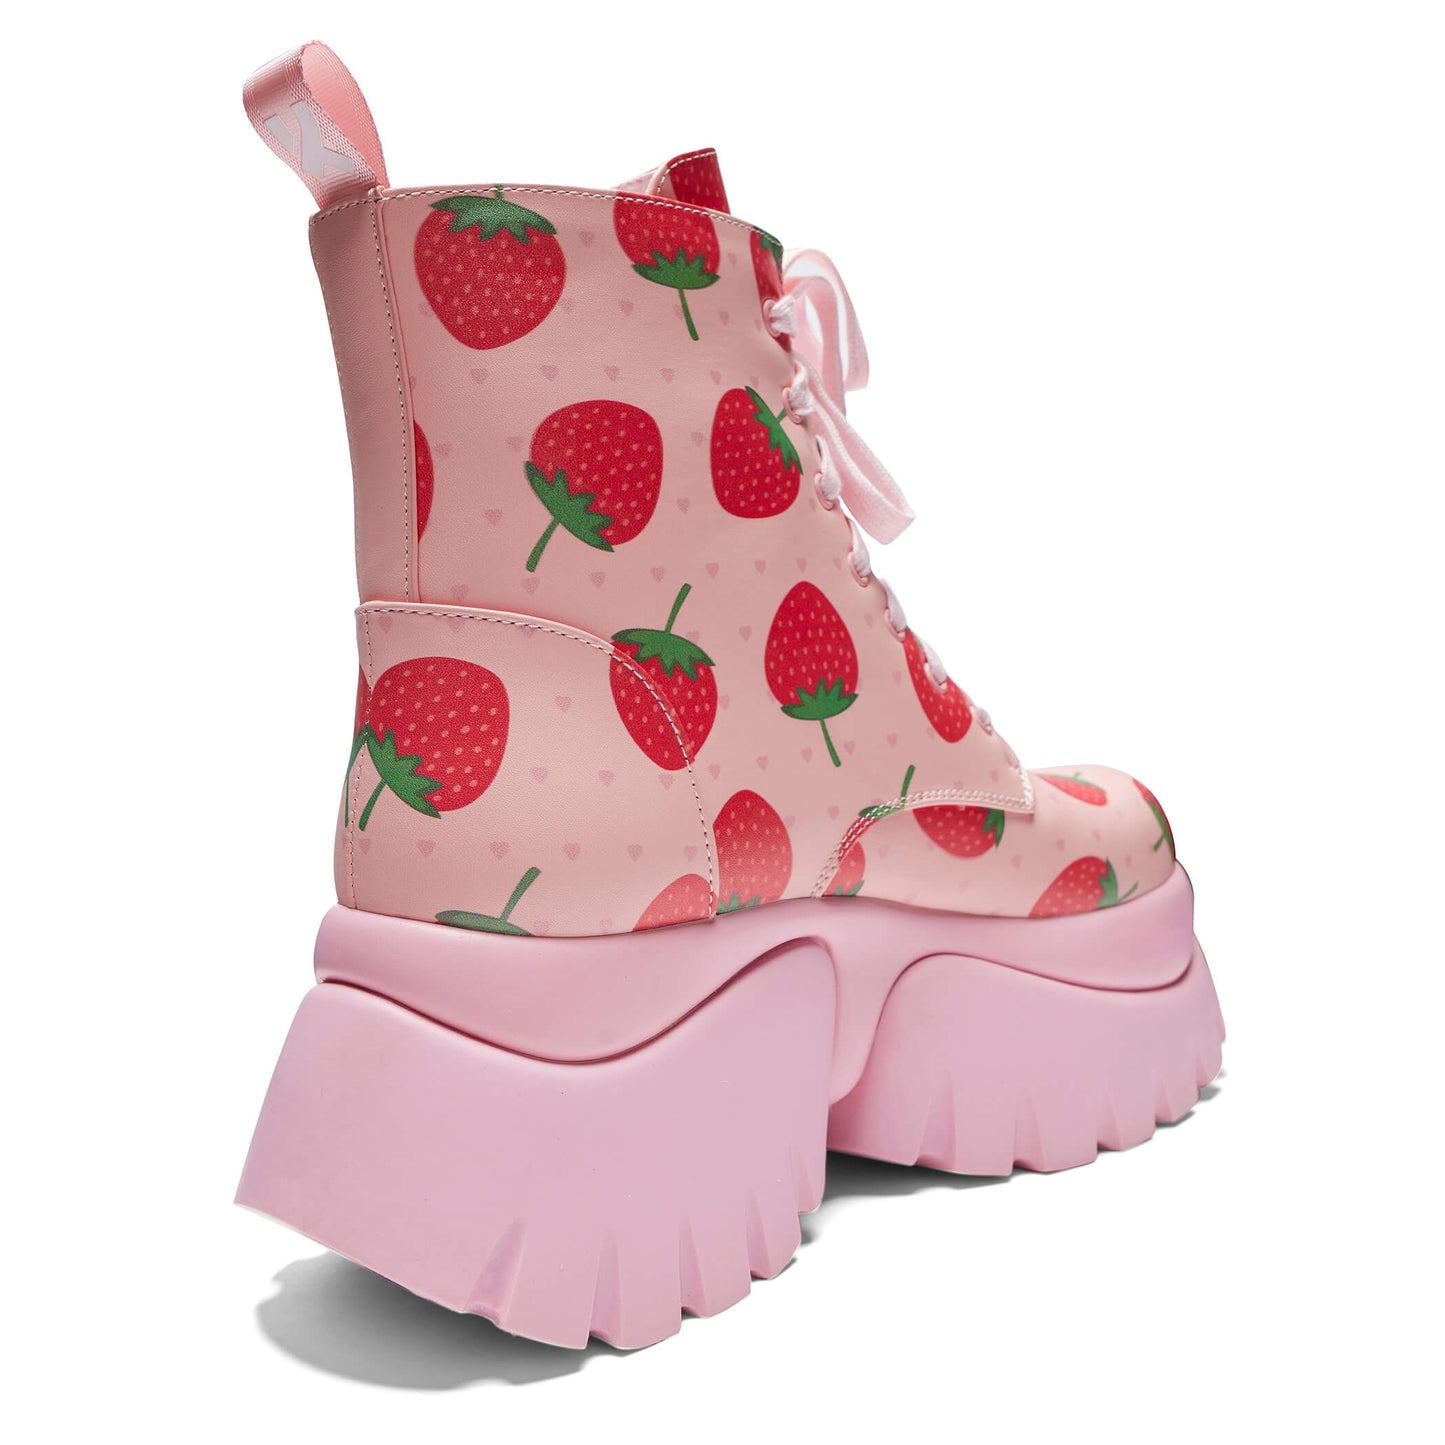 Strawberry Shortcake Pink Vilun Boots - Ankle Boots - KOI Footwear - Pink - Back Detail